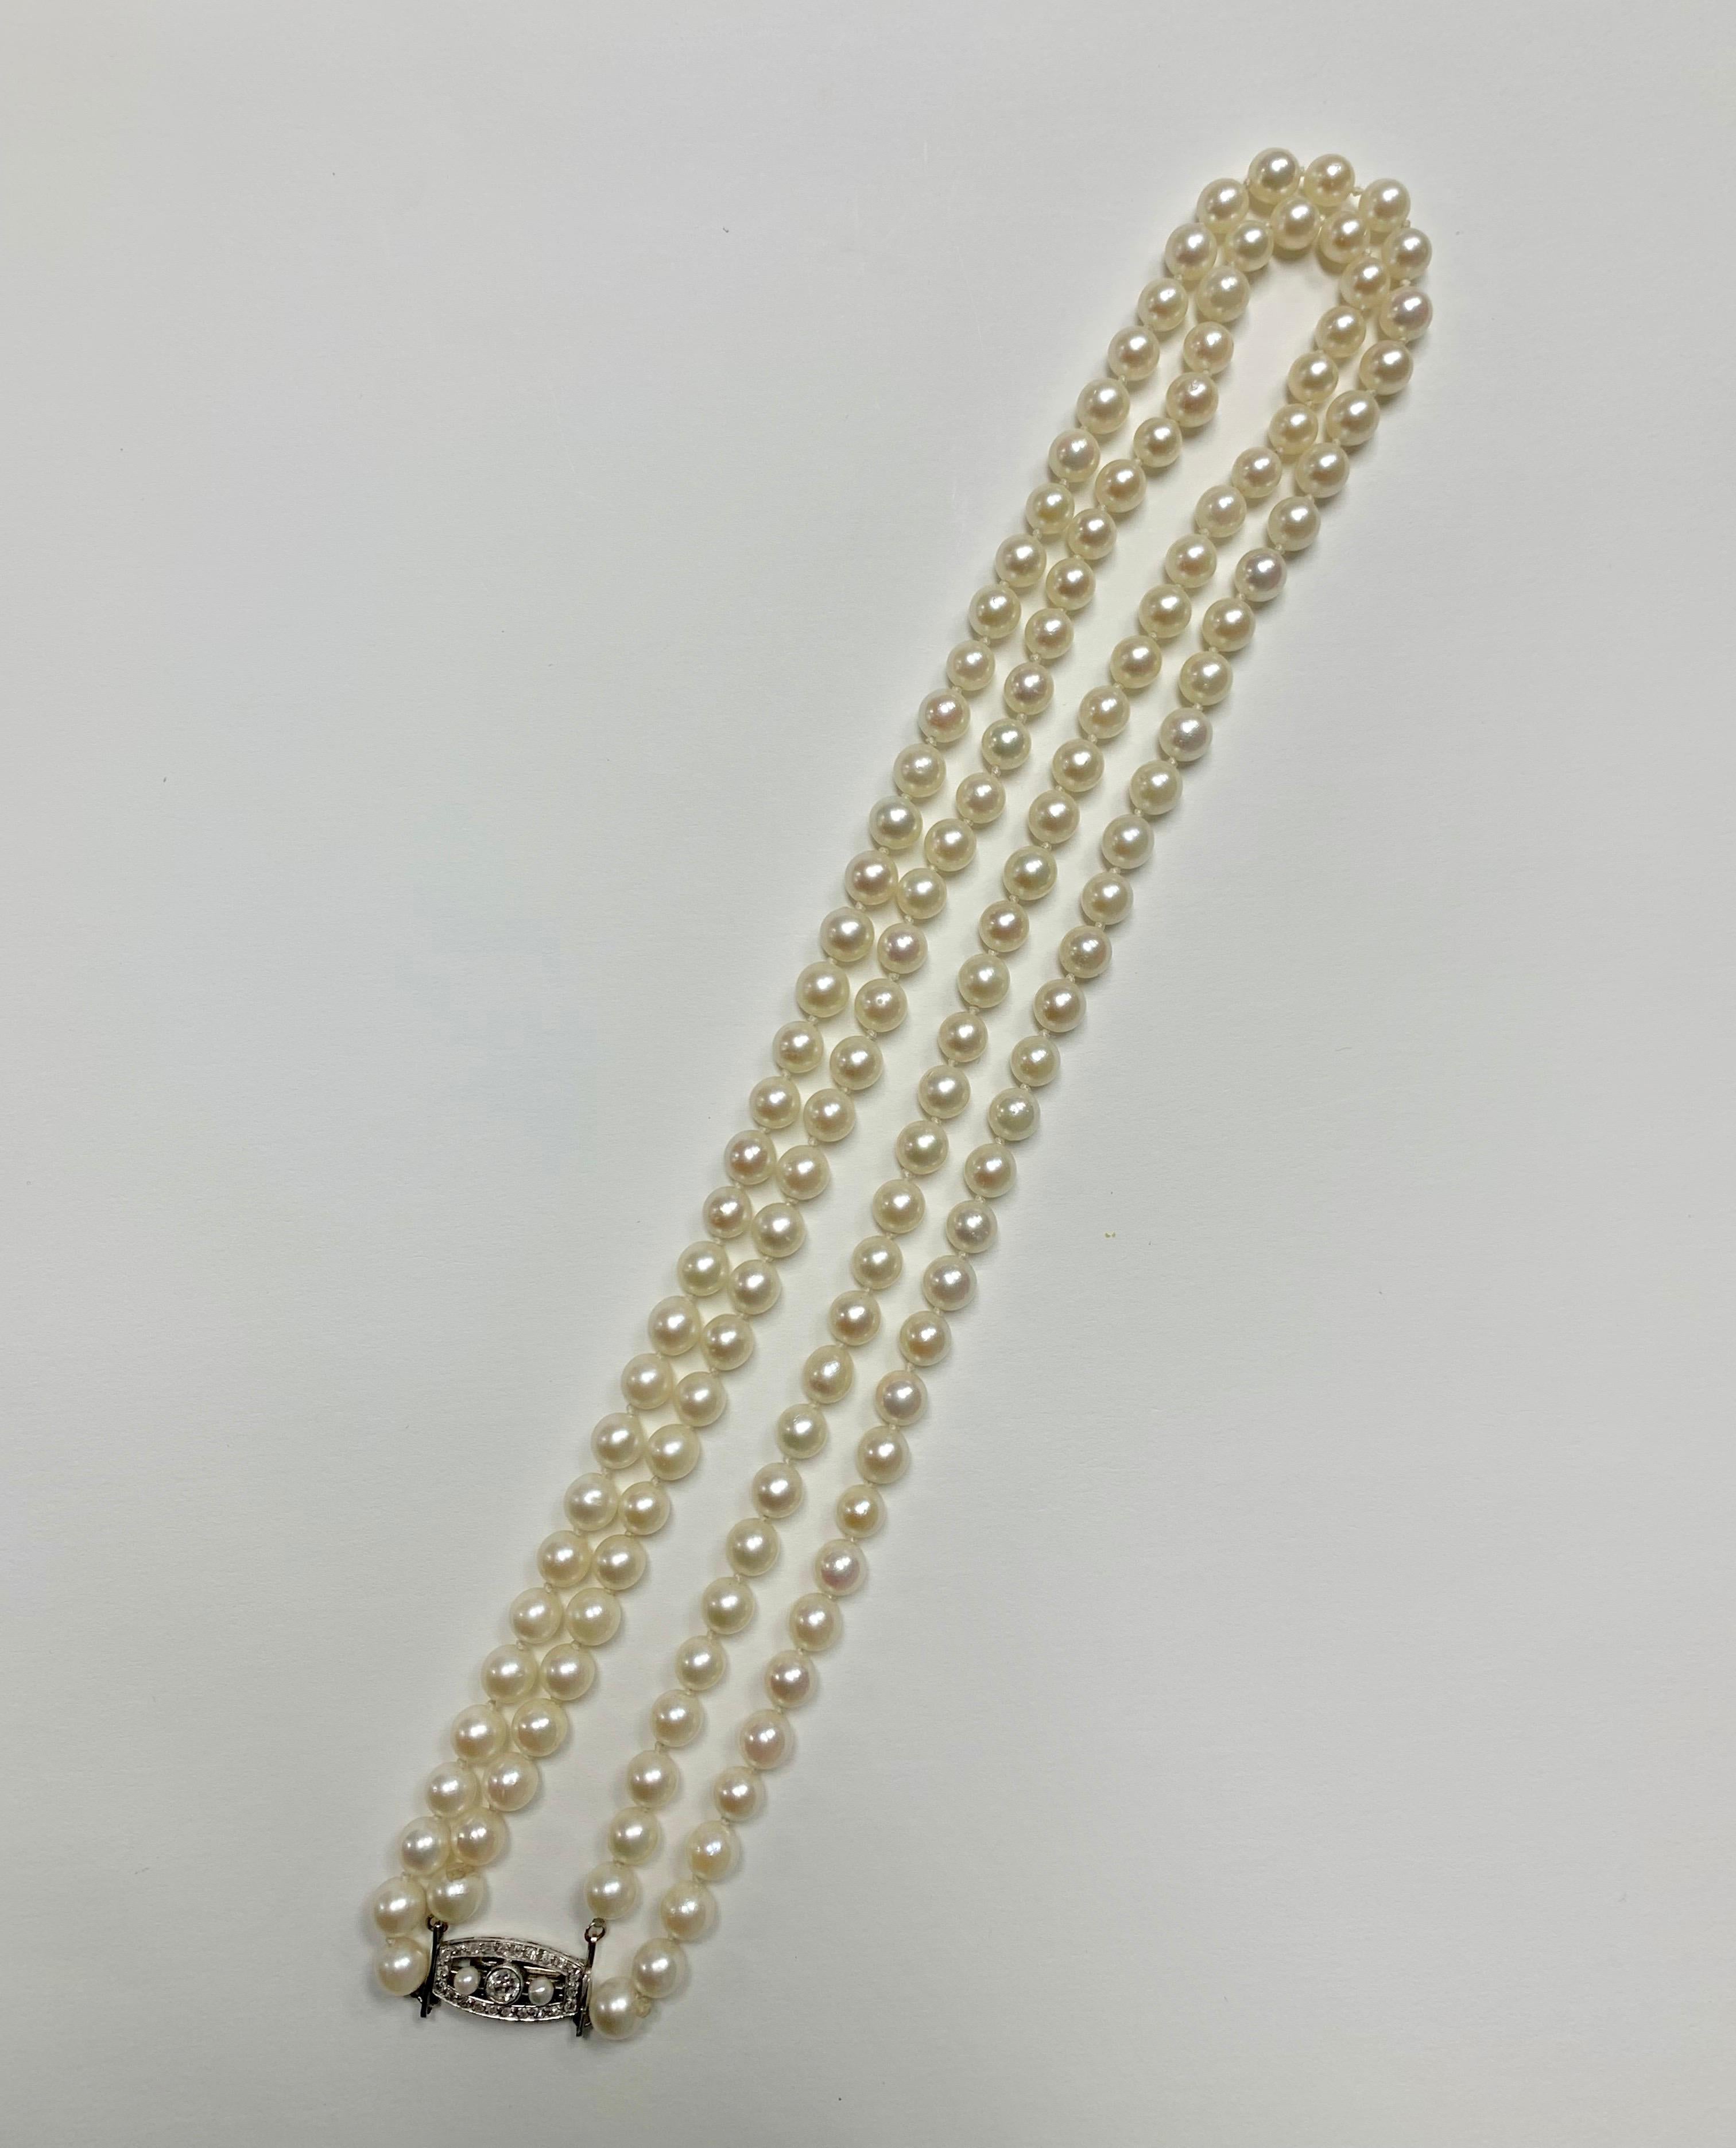 1920 Antique Akoya cultured pearls are drilled in a two strand pearl necklace diamond with a platinum clasp set with white european brilliant and single cut diamonds. 
Length : 18 inches long 
No of pearls : 134 drilled round pearl 


